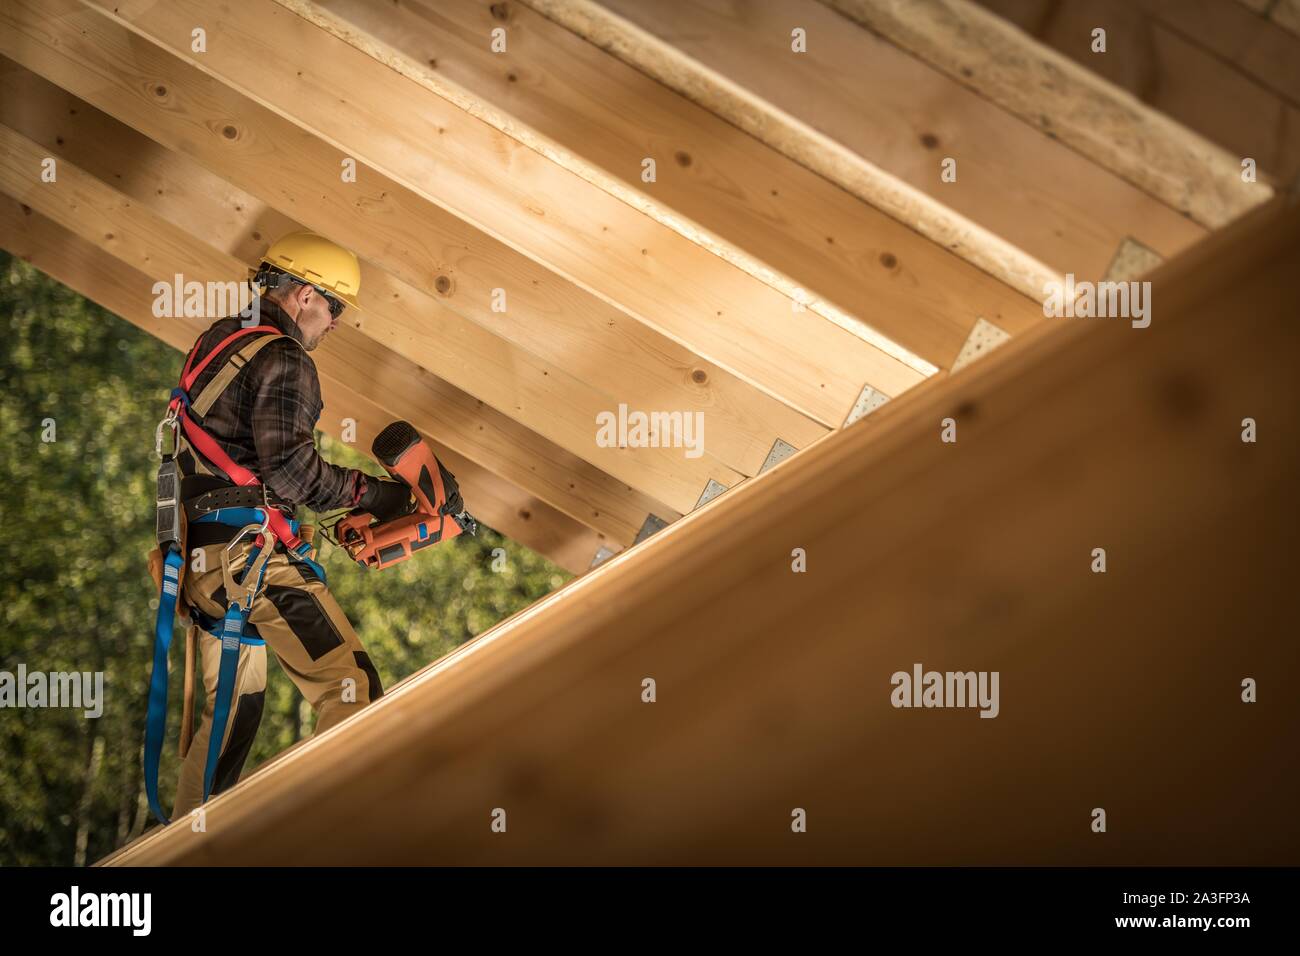 Professional Carpenter Contractor Job. Caucasian Worker with Nail Gun and the Wooden House Roof Frame. Industrial Theme. Stock Photo